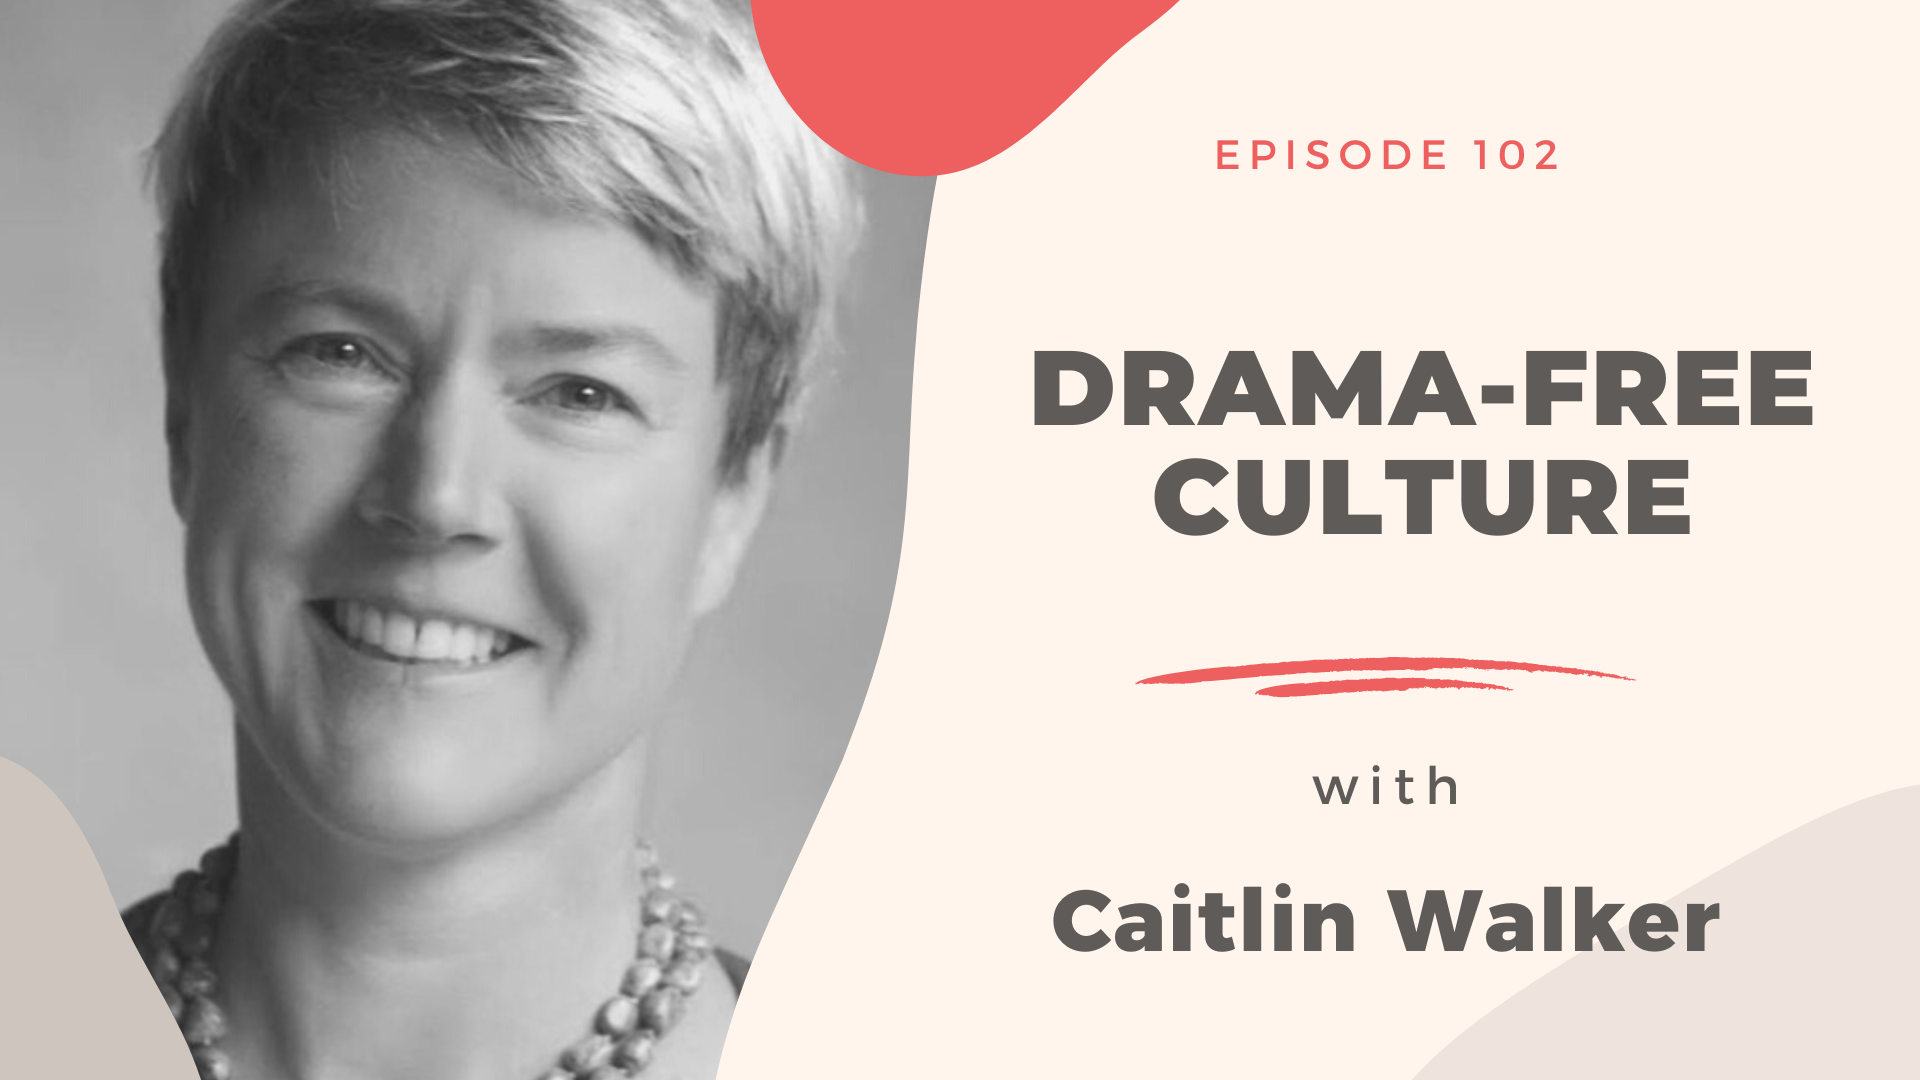 Drama-Free Culture with Cailtin Walker